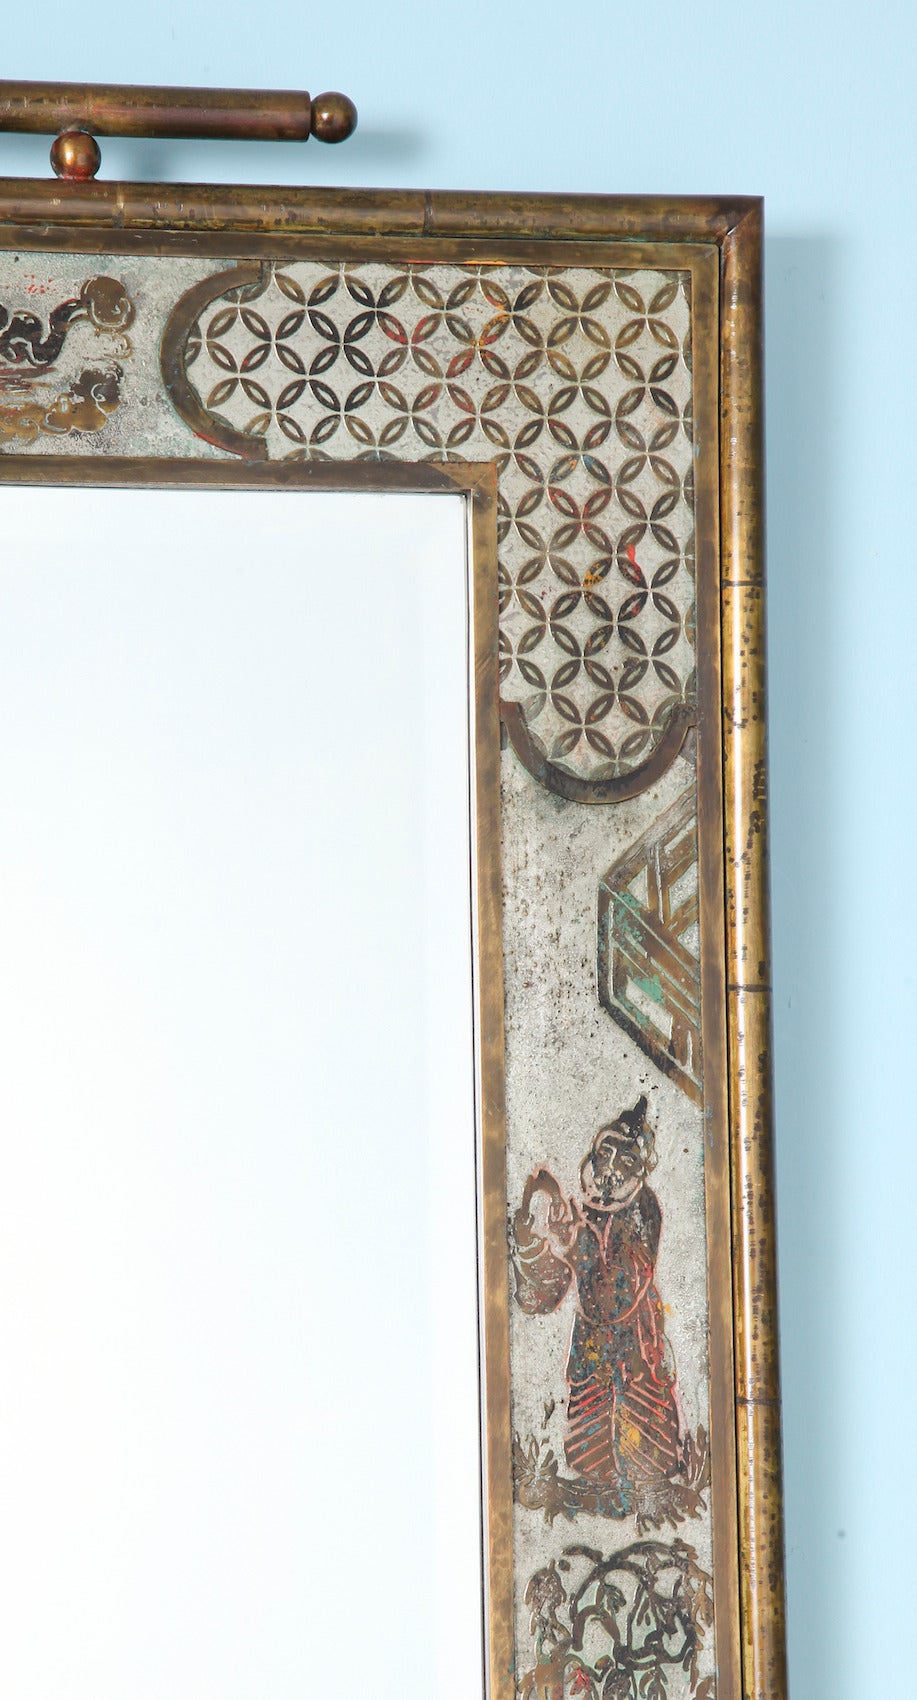 Rare asian style mirror by Philip & Kelvin LaVerne.  Bronze and pewter framed mirror with circular patterned corners and scenic decoration. Bright, colored enamel flourishes and Asian-styled top-piece. A very unusual model. Signed on frame.